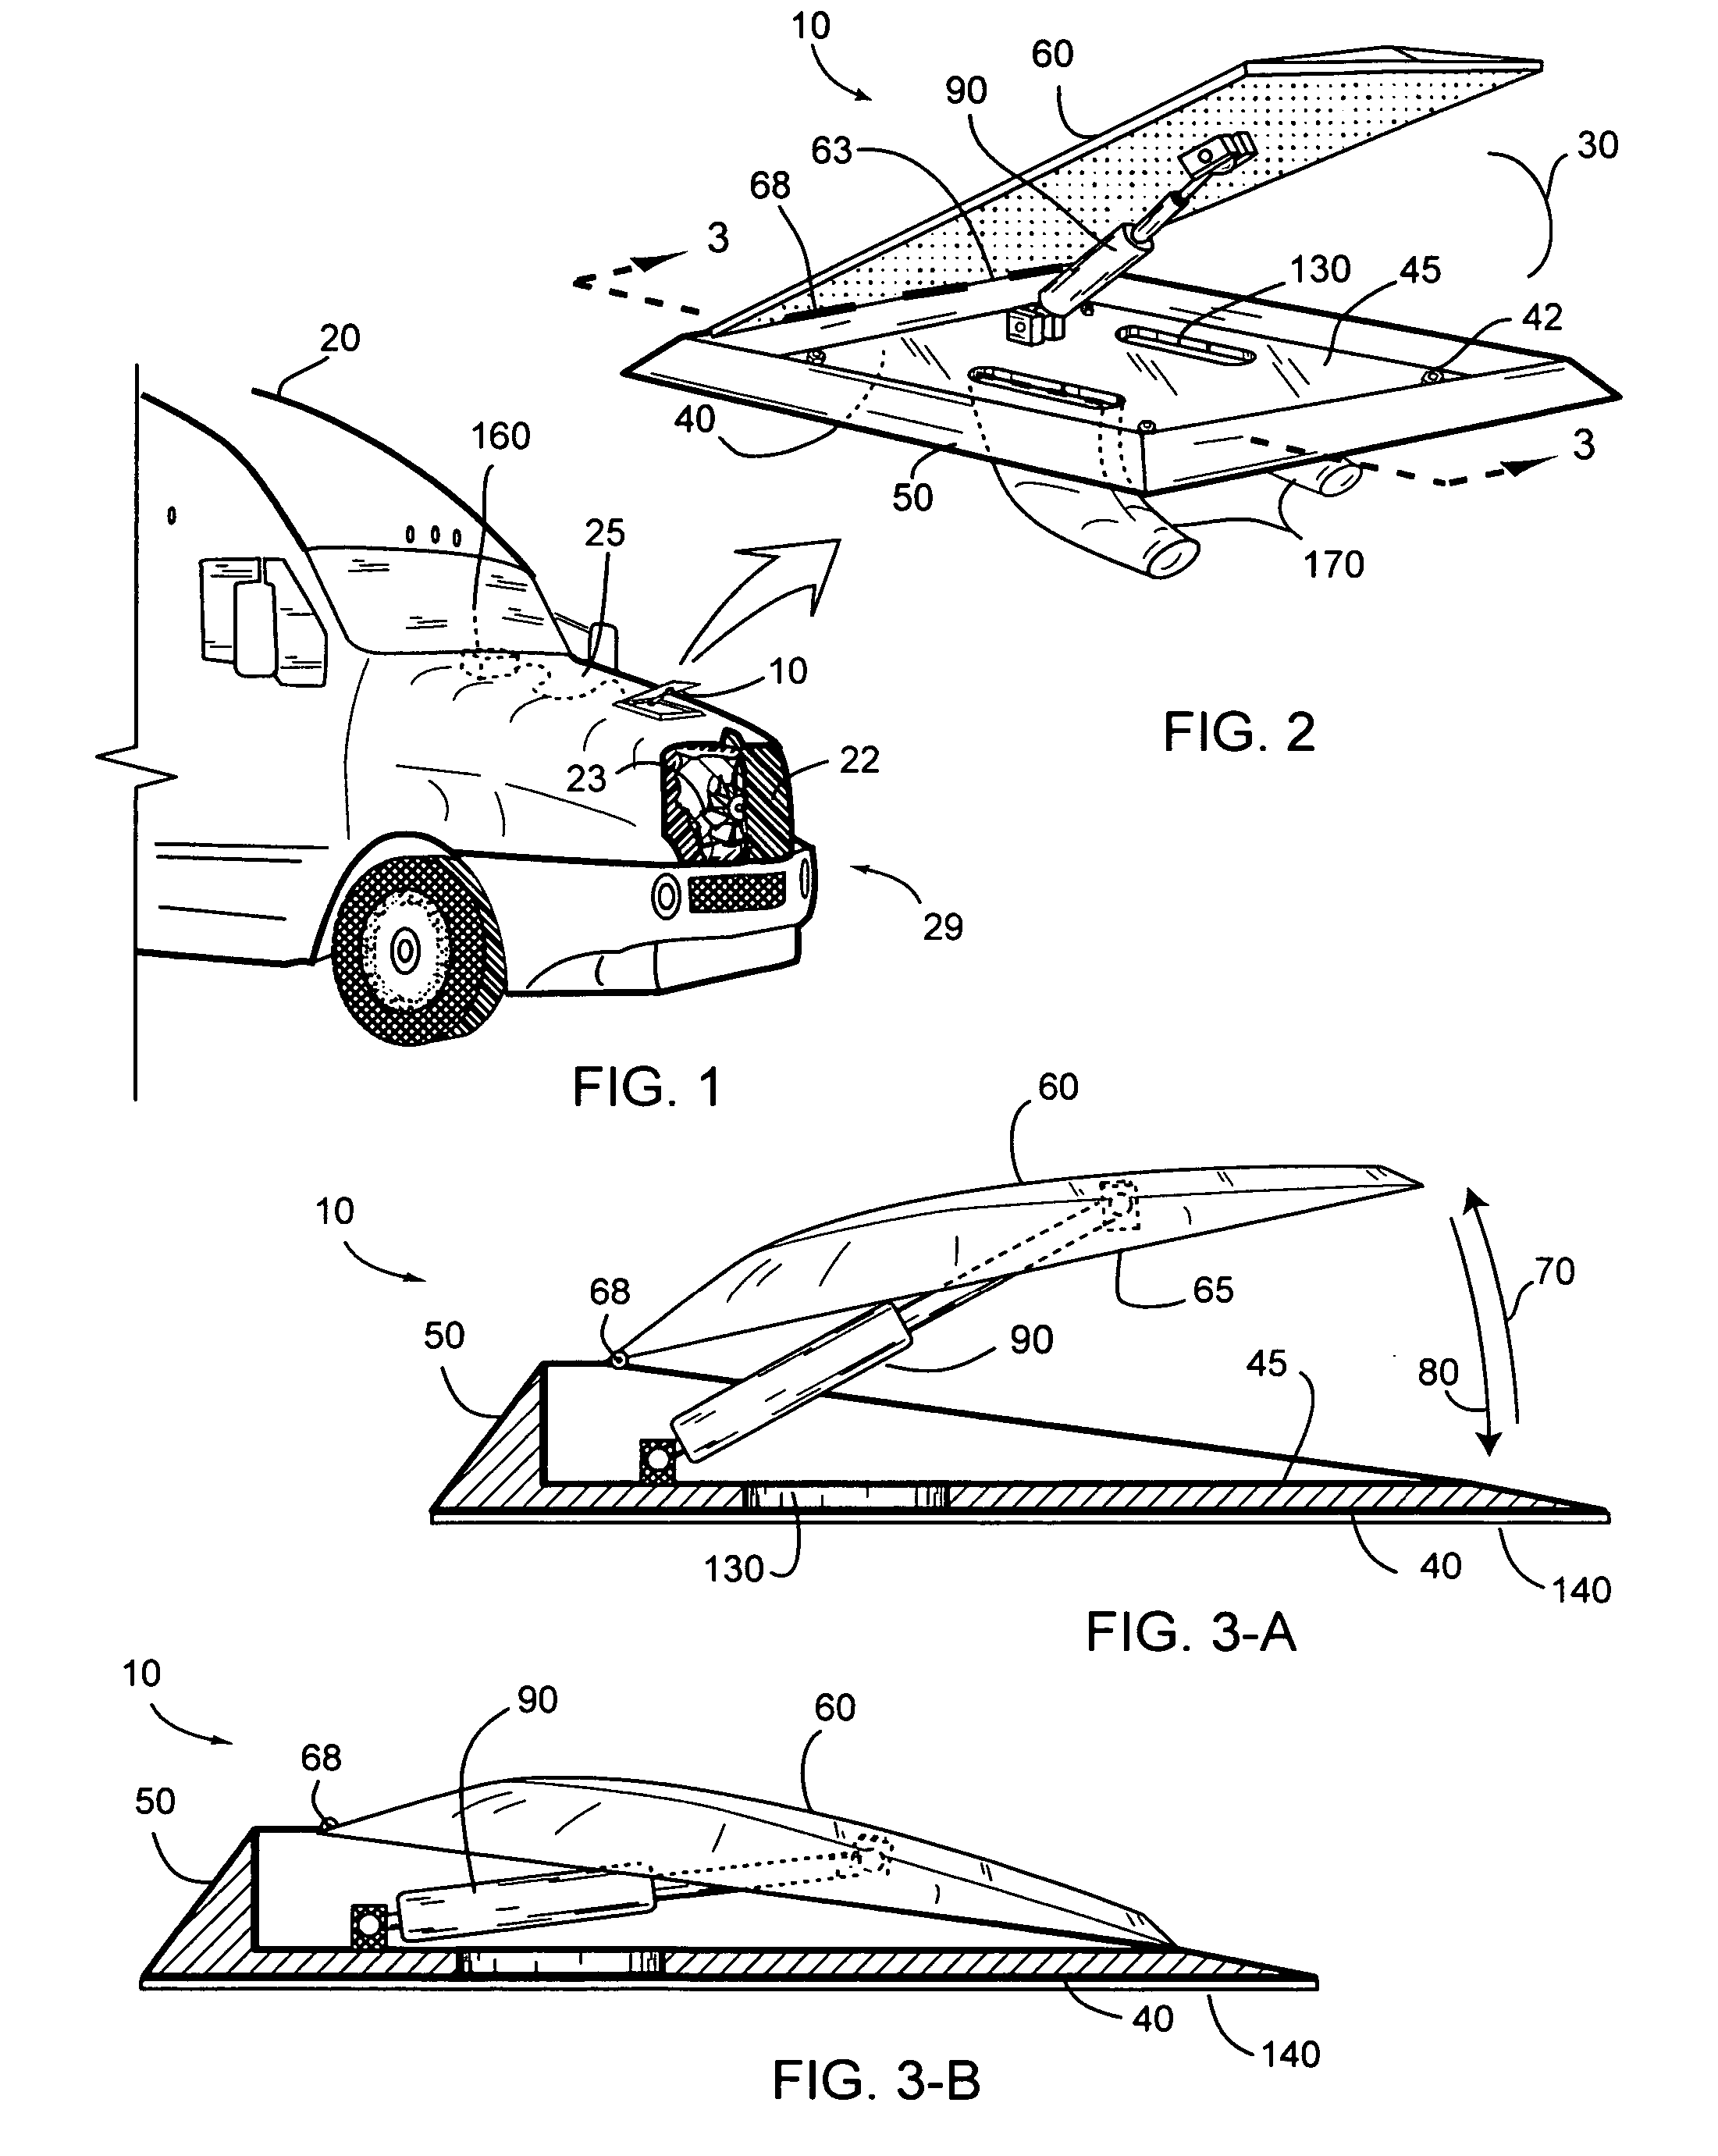 Self-contained adjustable air foil and method